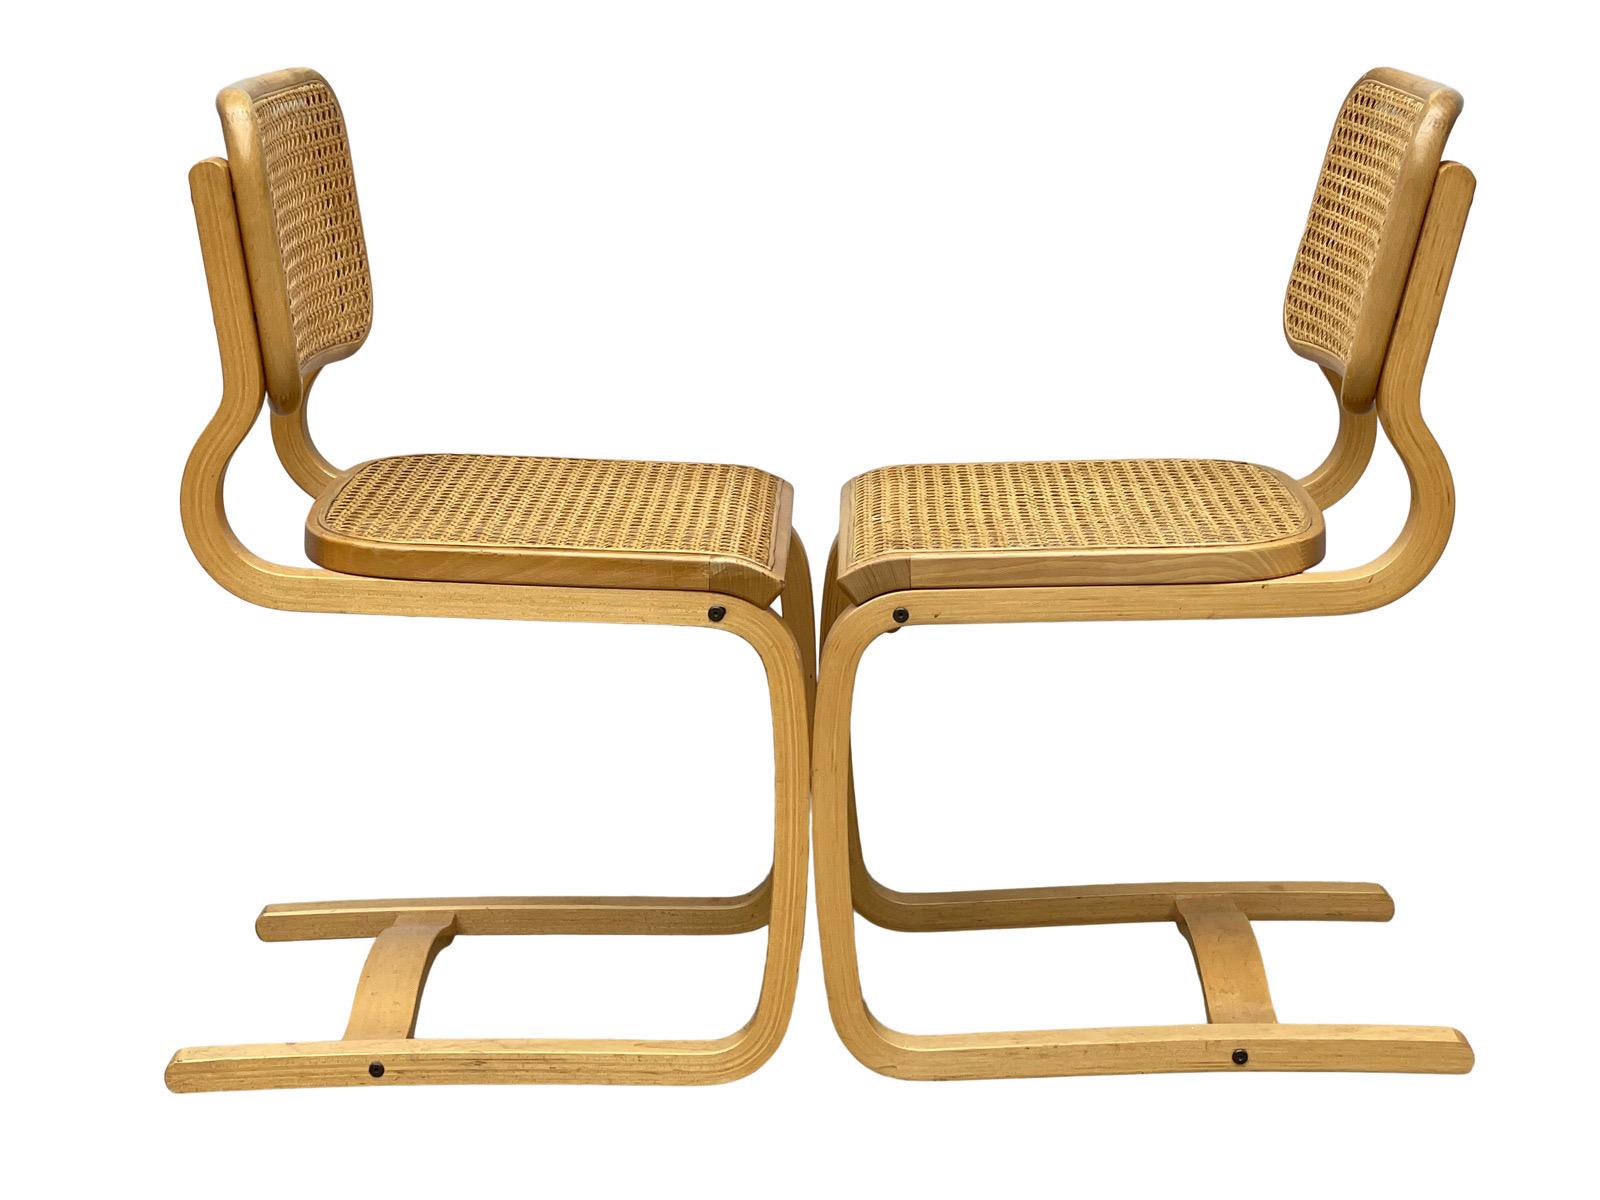 Interesting variation of the Classic Breuer,
and alto chairs, made in Poland, circa
1970s. Set of 4